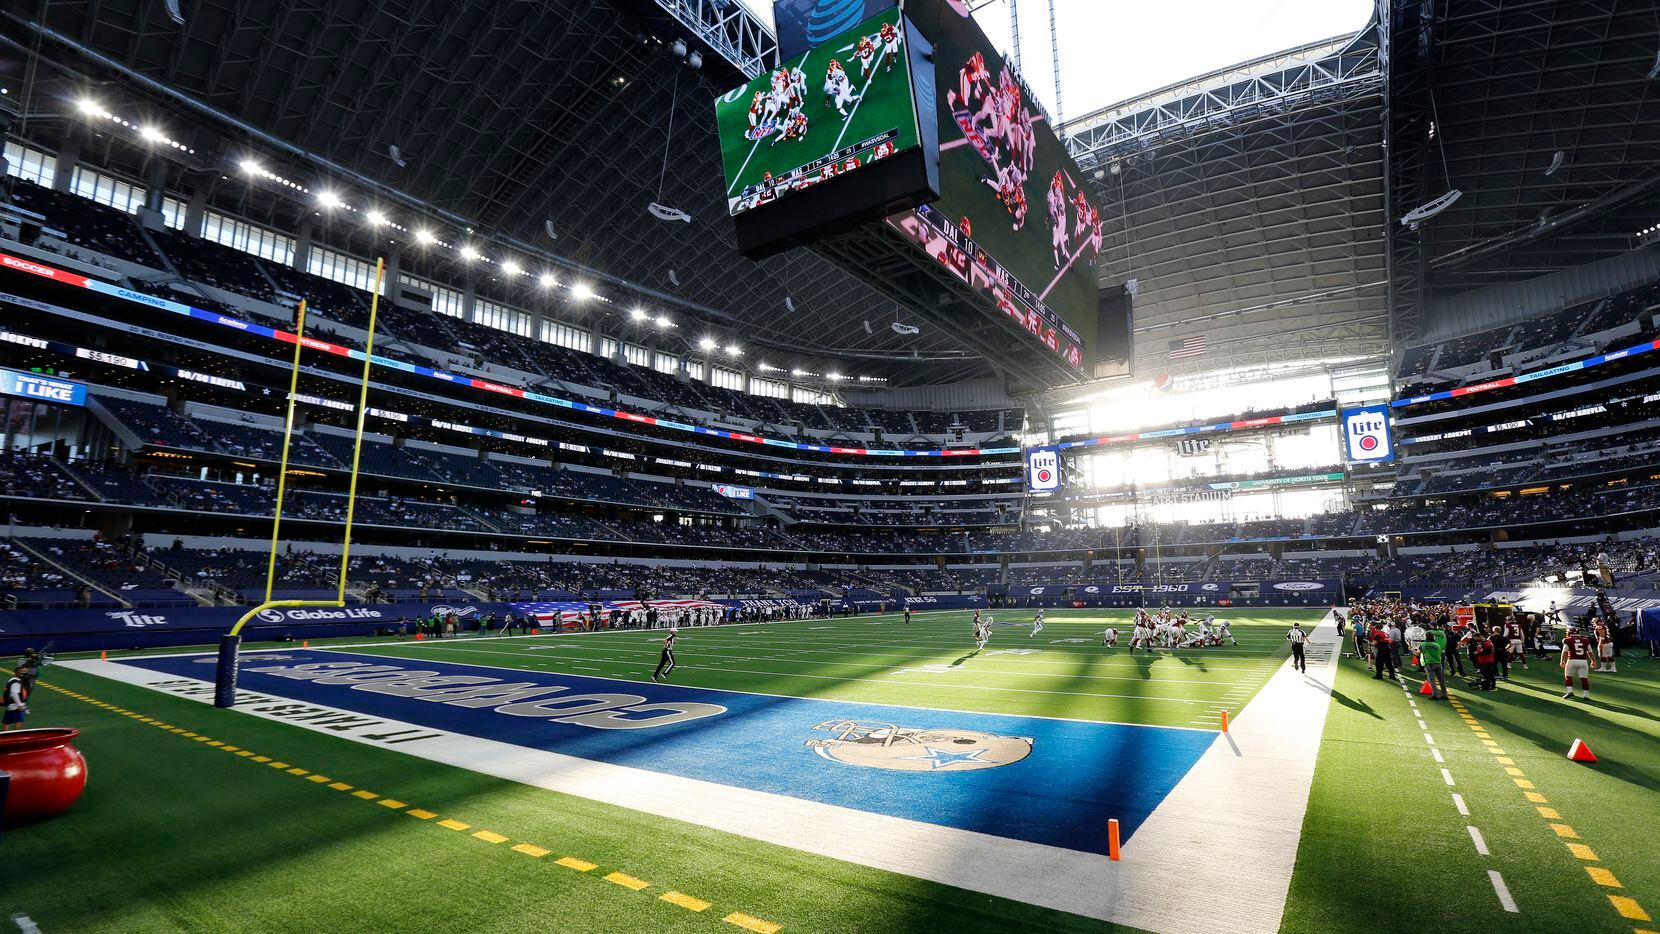 The sun shines through the open end zone doors and roof as the Dallas Cowboys faced the...